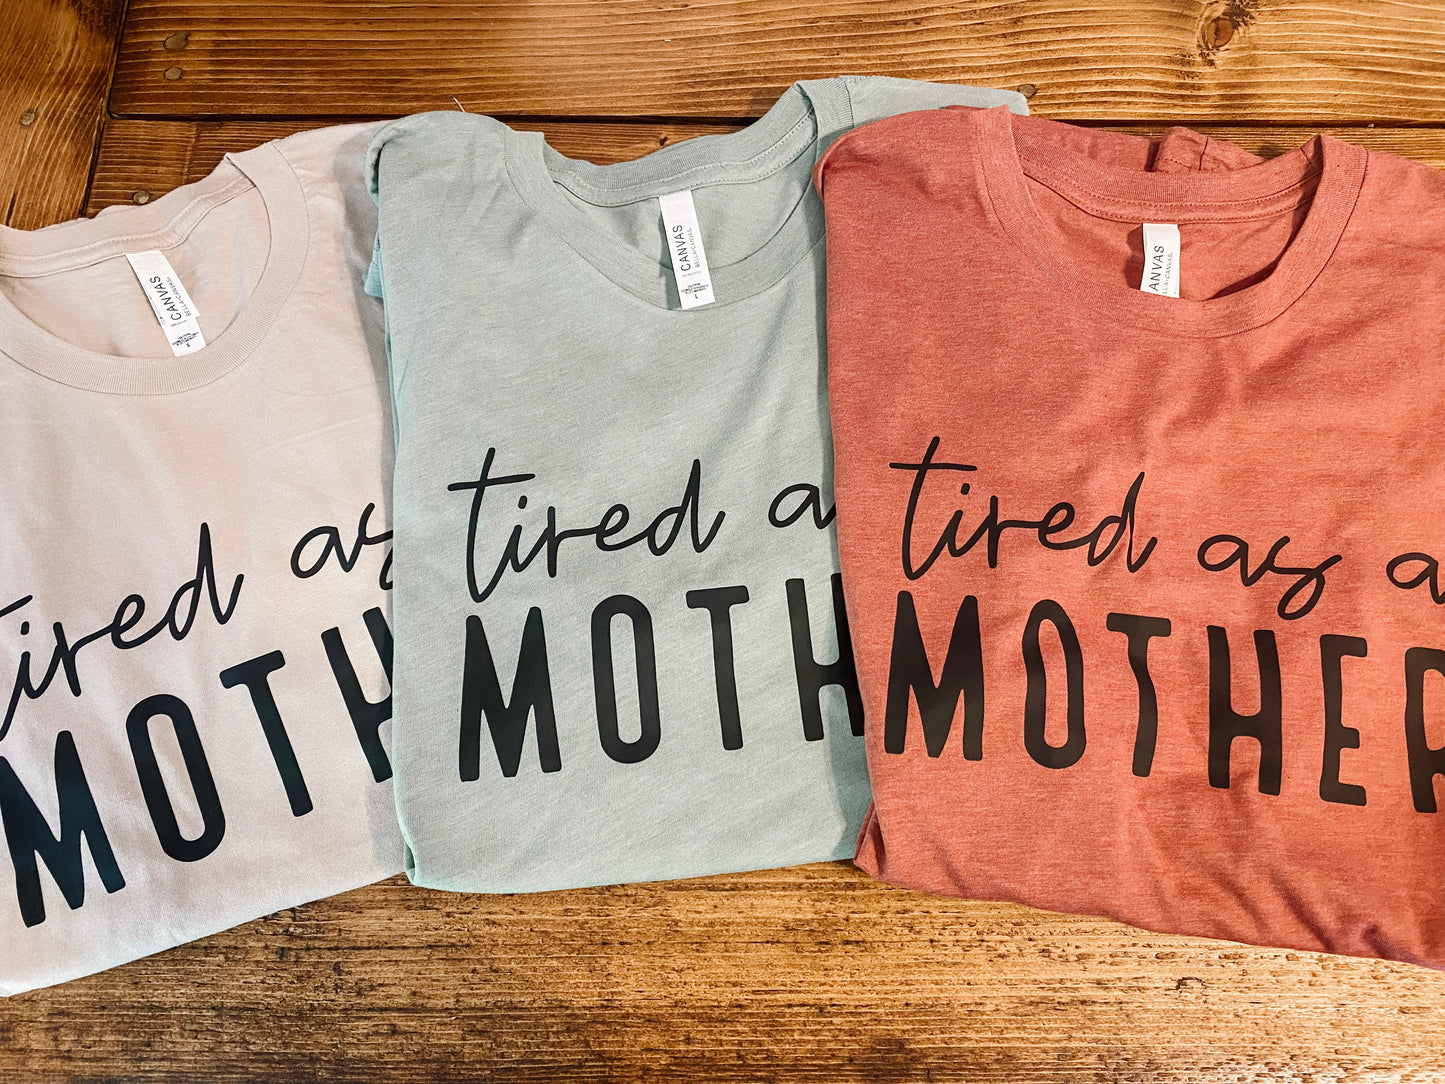 Tired as a Mother t-shirt